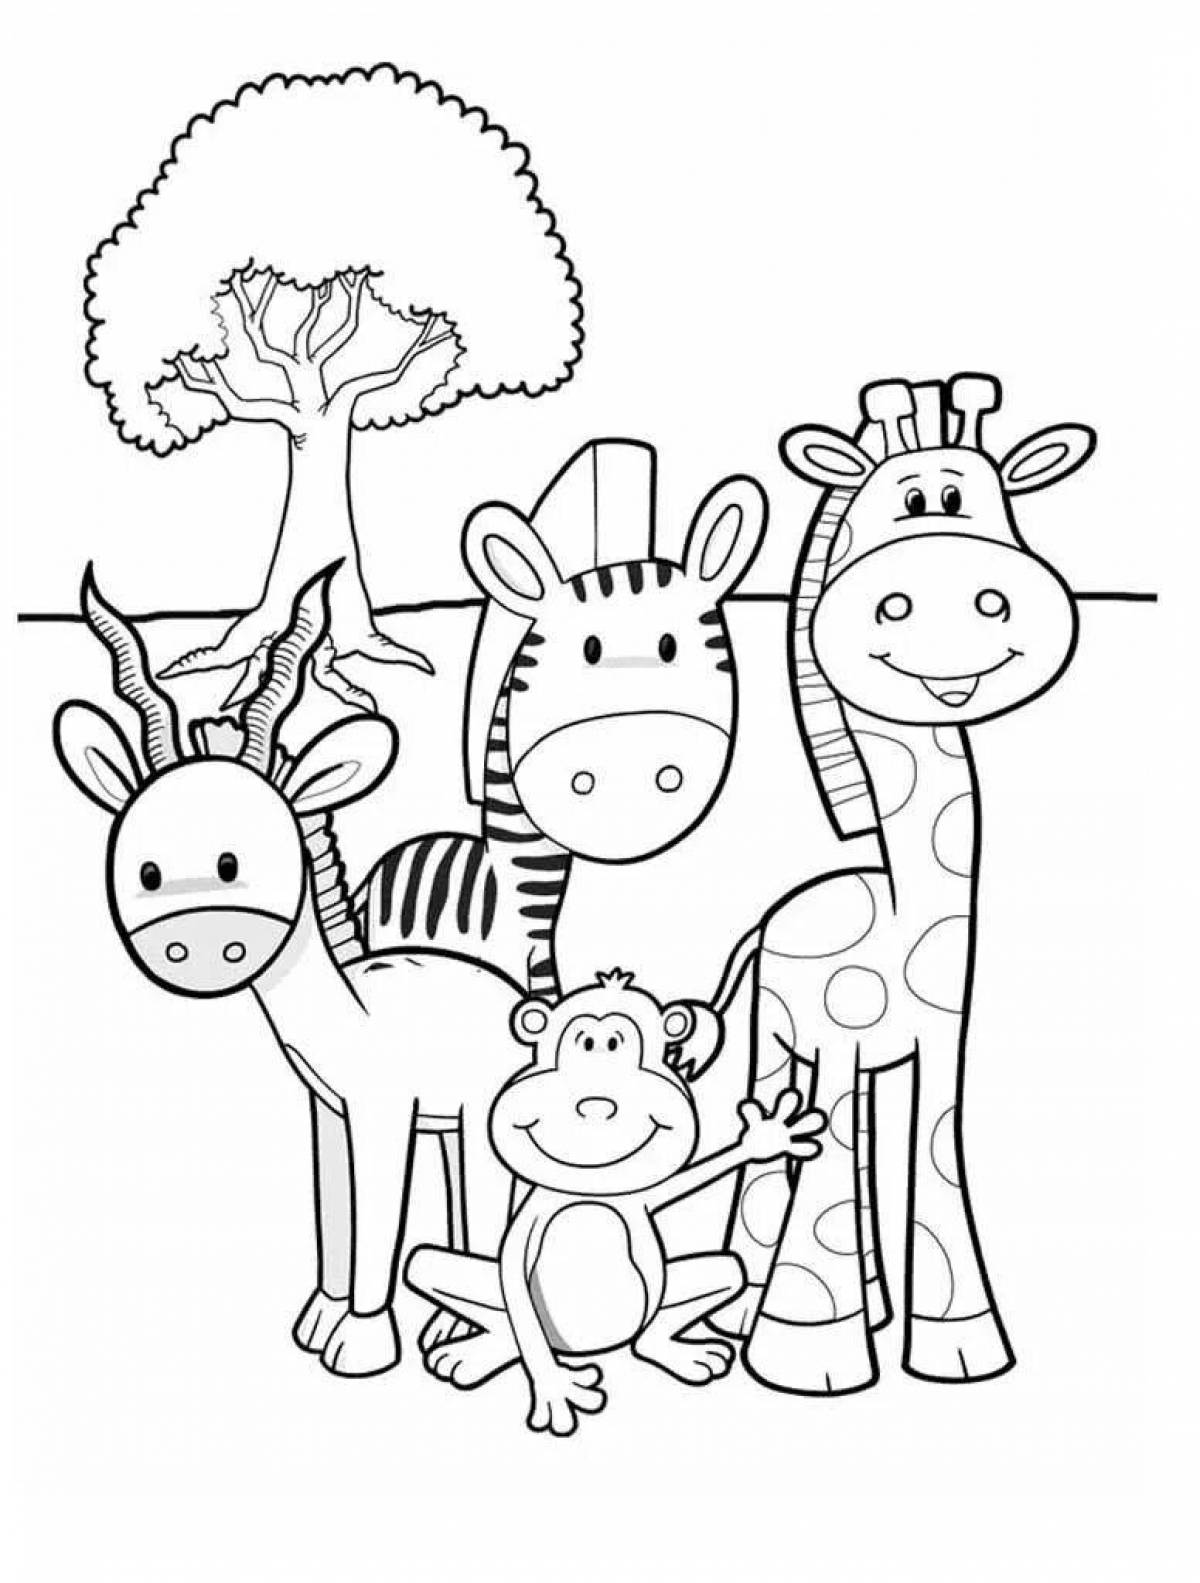 Live coloring all animals